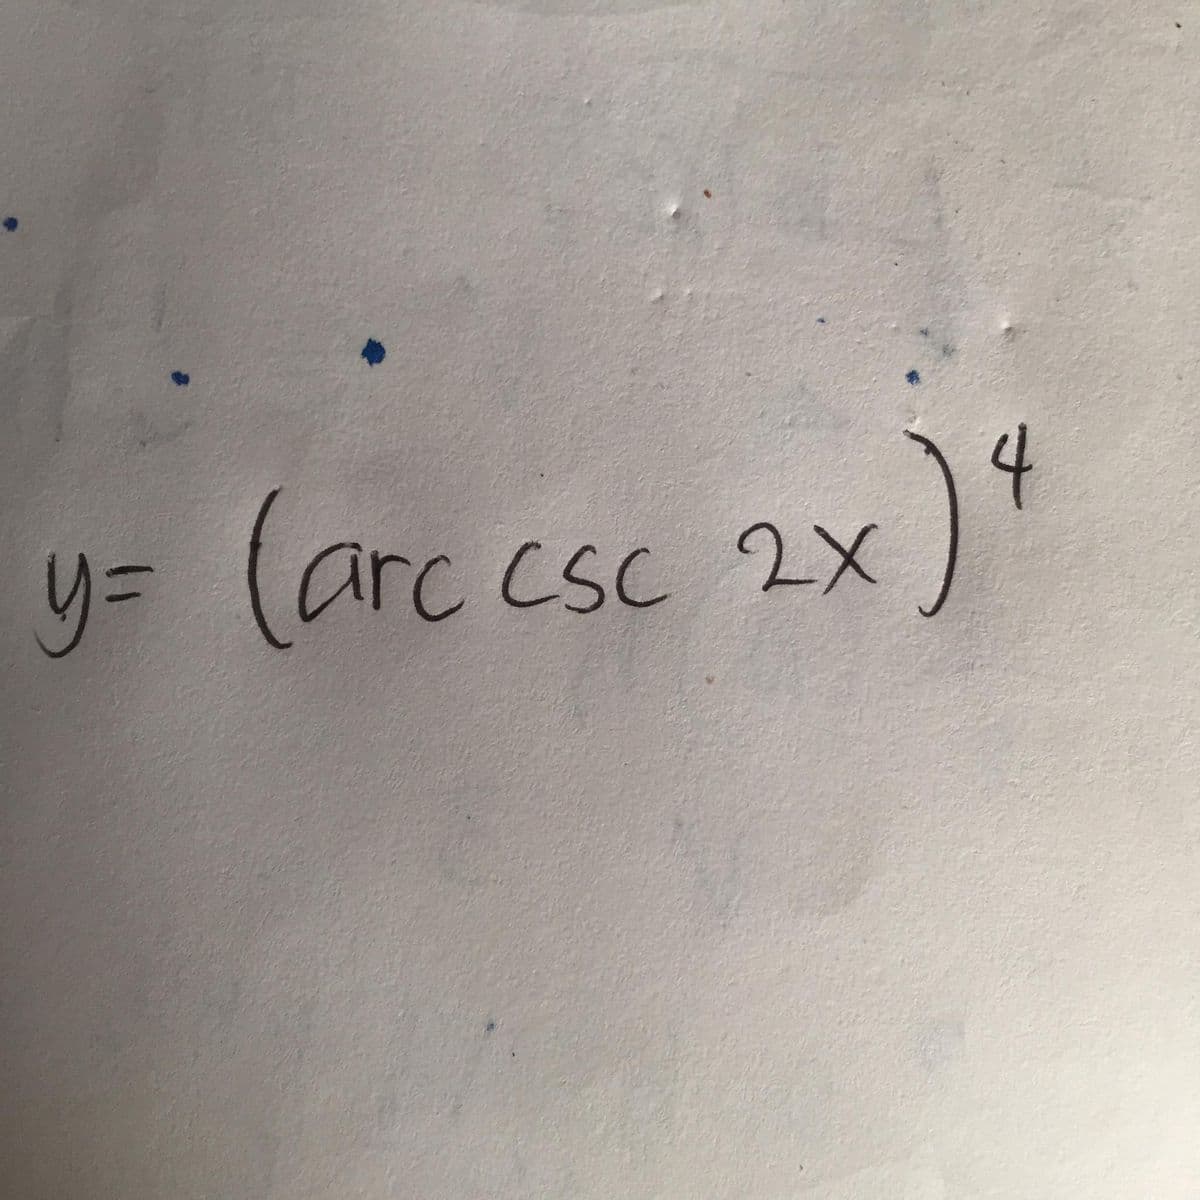 y= (arc csc 2x)*
4
in
